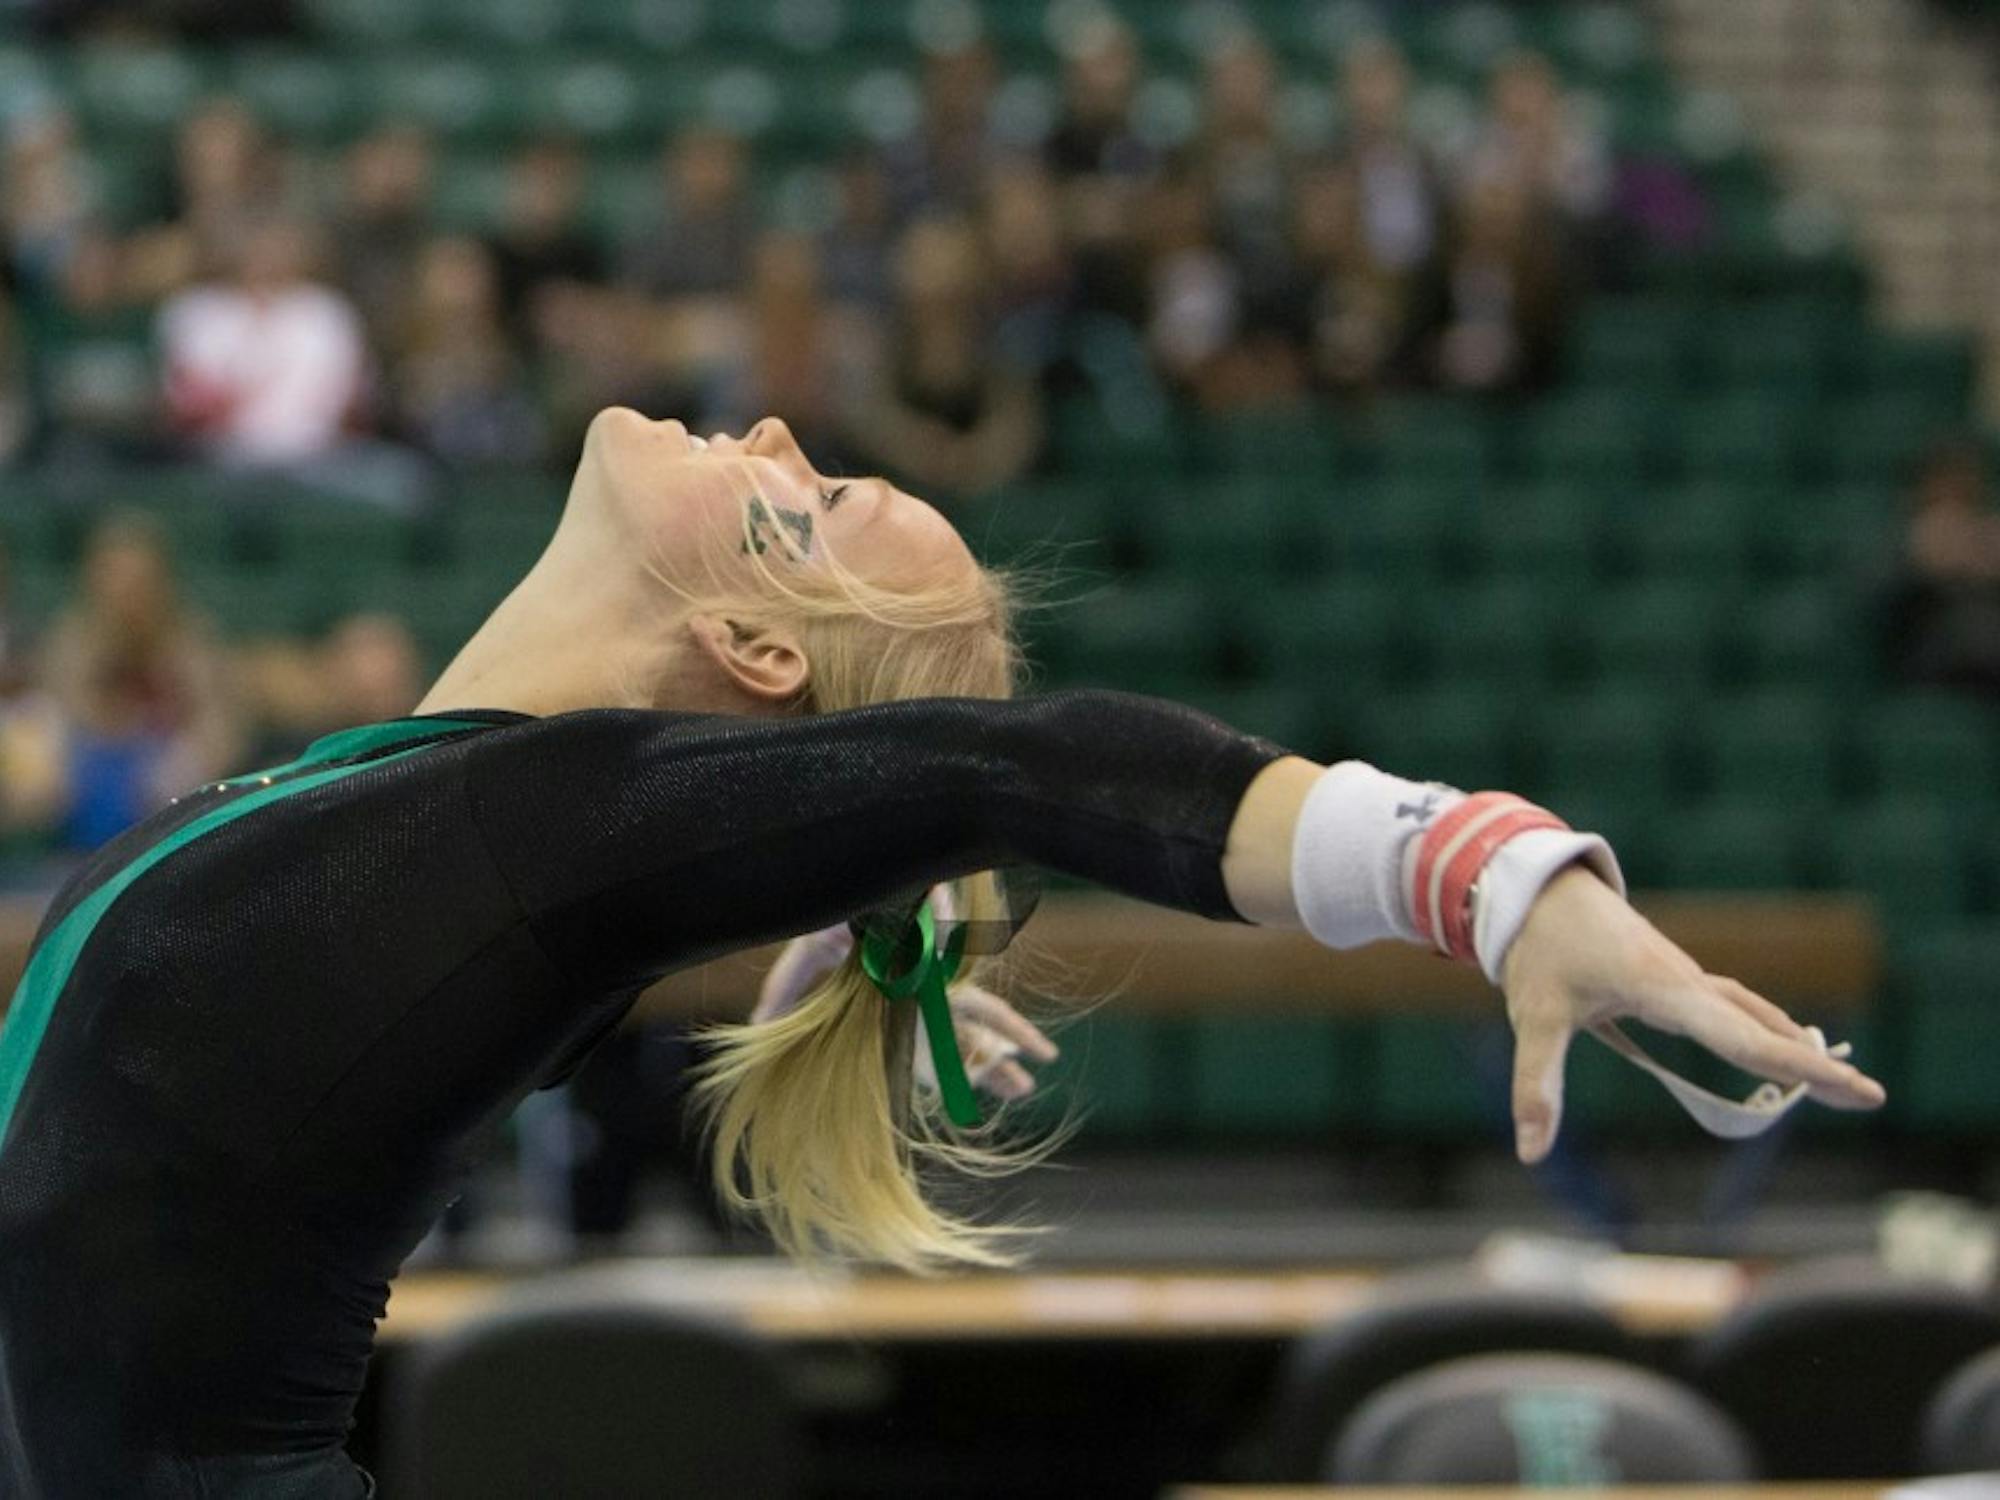 Eastern Michigan senior Nikki Paterson scored a career high 9.775 on the bars in the Eagles 194.700-193.800 win over Kent State on Feb. 7 2015 in Ypsilanti.